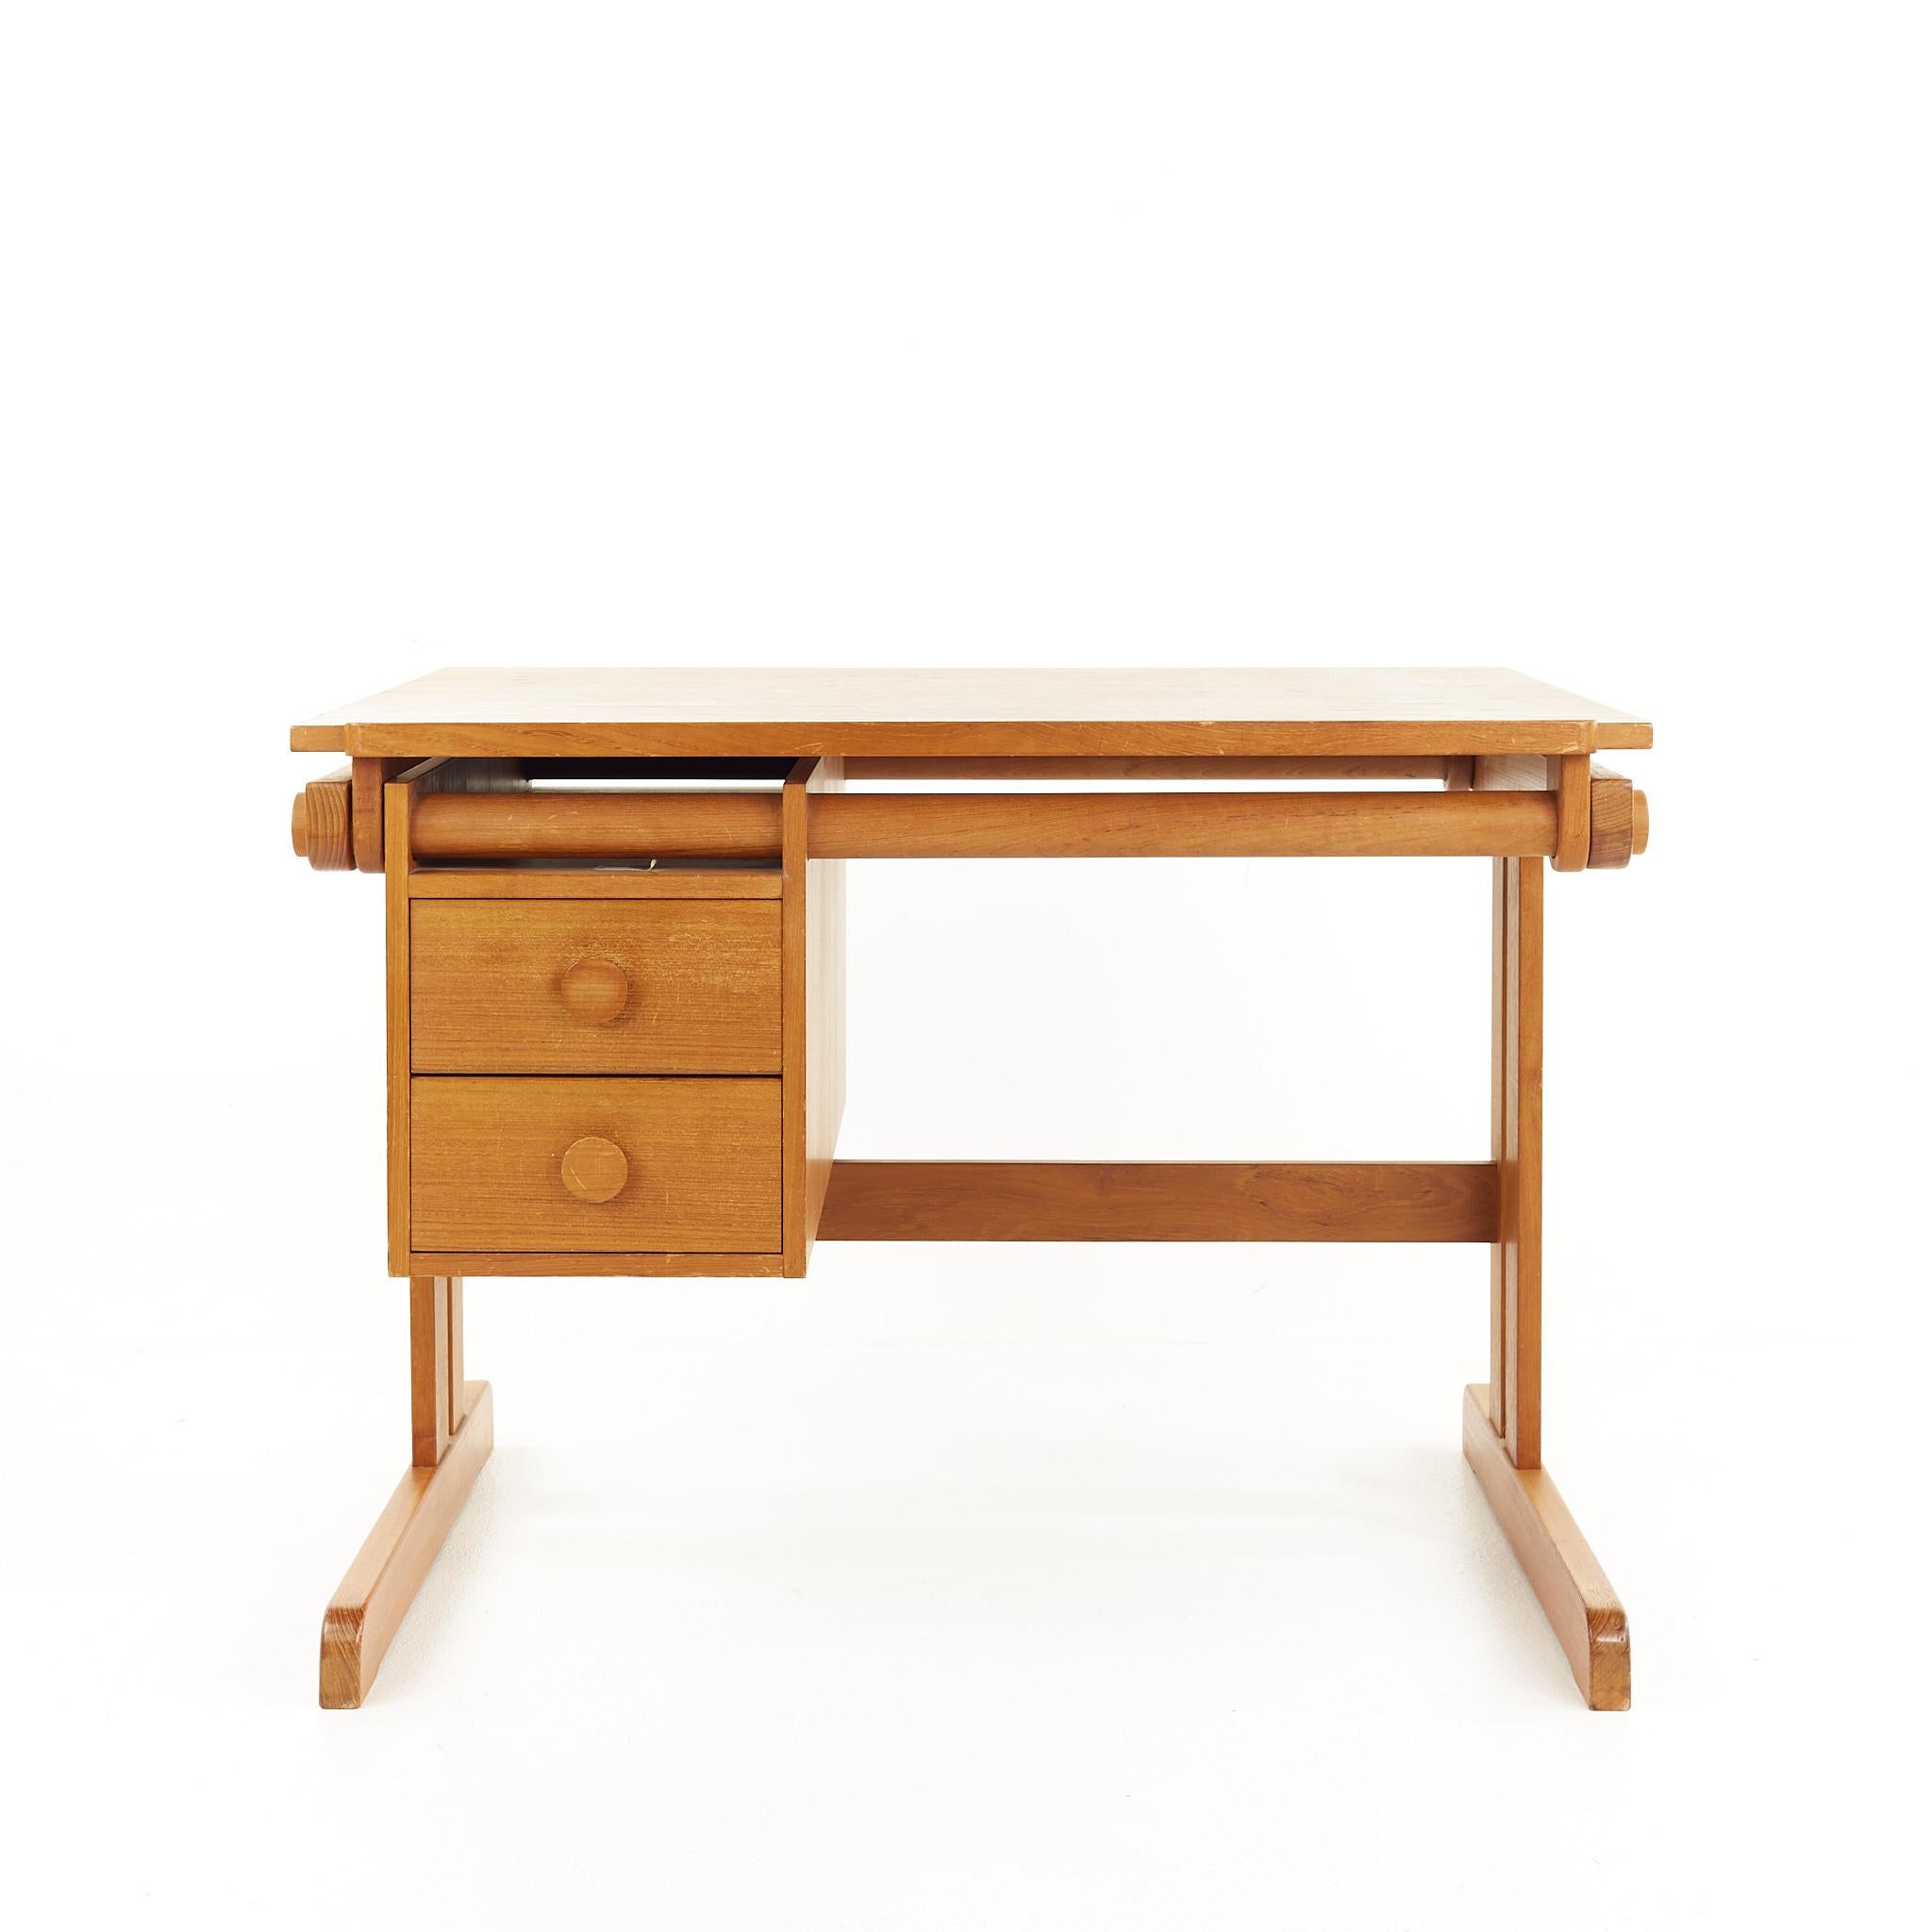 H. Sigh & Søns Mid Century teak adjustable drafting desk

The desk measures: 38.25 wide x 29 deep x 28.25 inches high, with a chair clearance of 24 inches 

All pieces of furniture can be had in what we call restored vintage condition. That